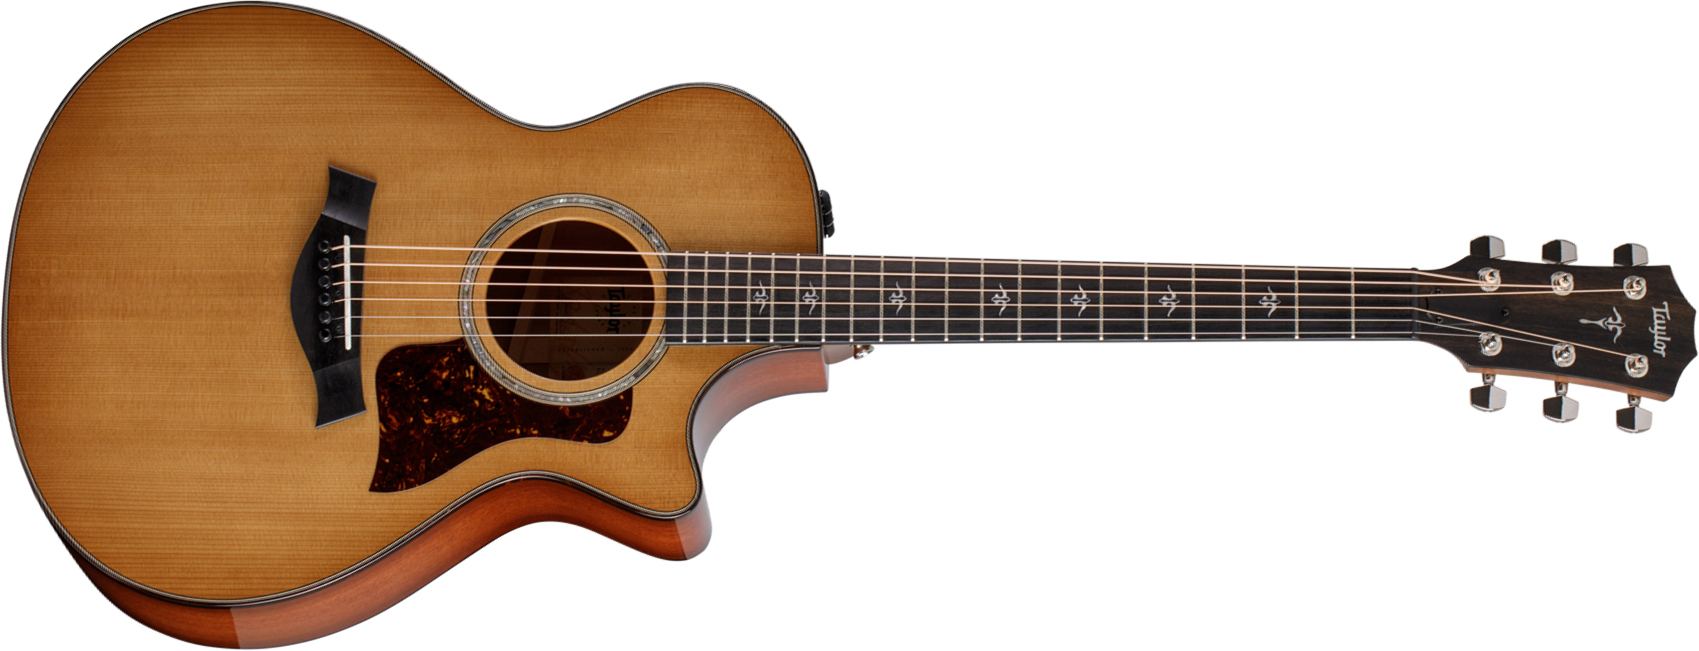 Taylor 512ce V-class Grand Concert Cw Epicea Red Urban Ironbark Eb Es2 - Natural - Electro acoustic guitar - Main picture